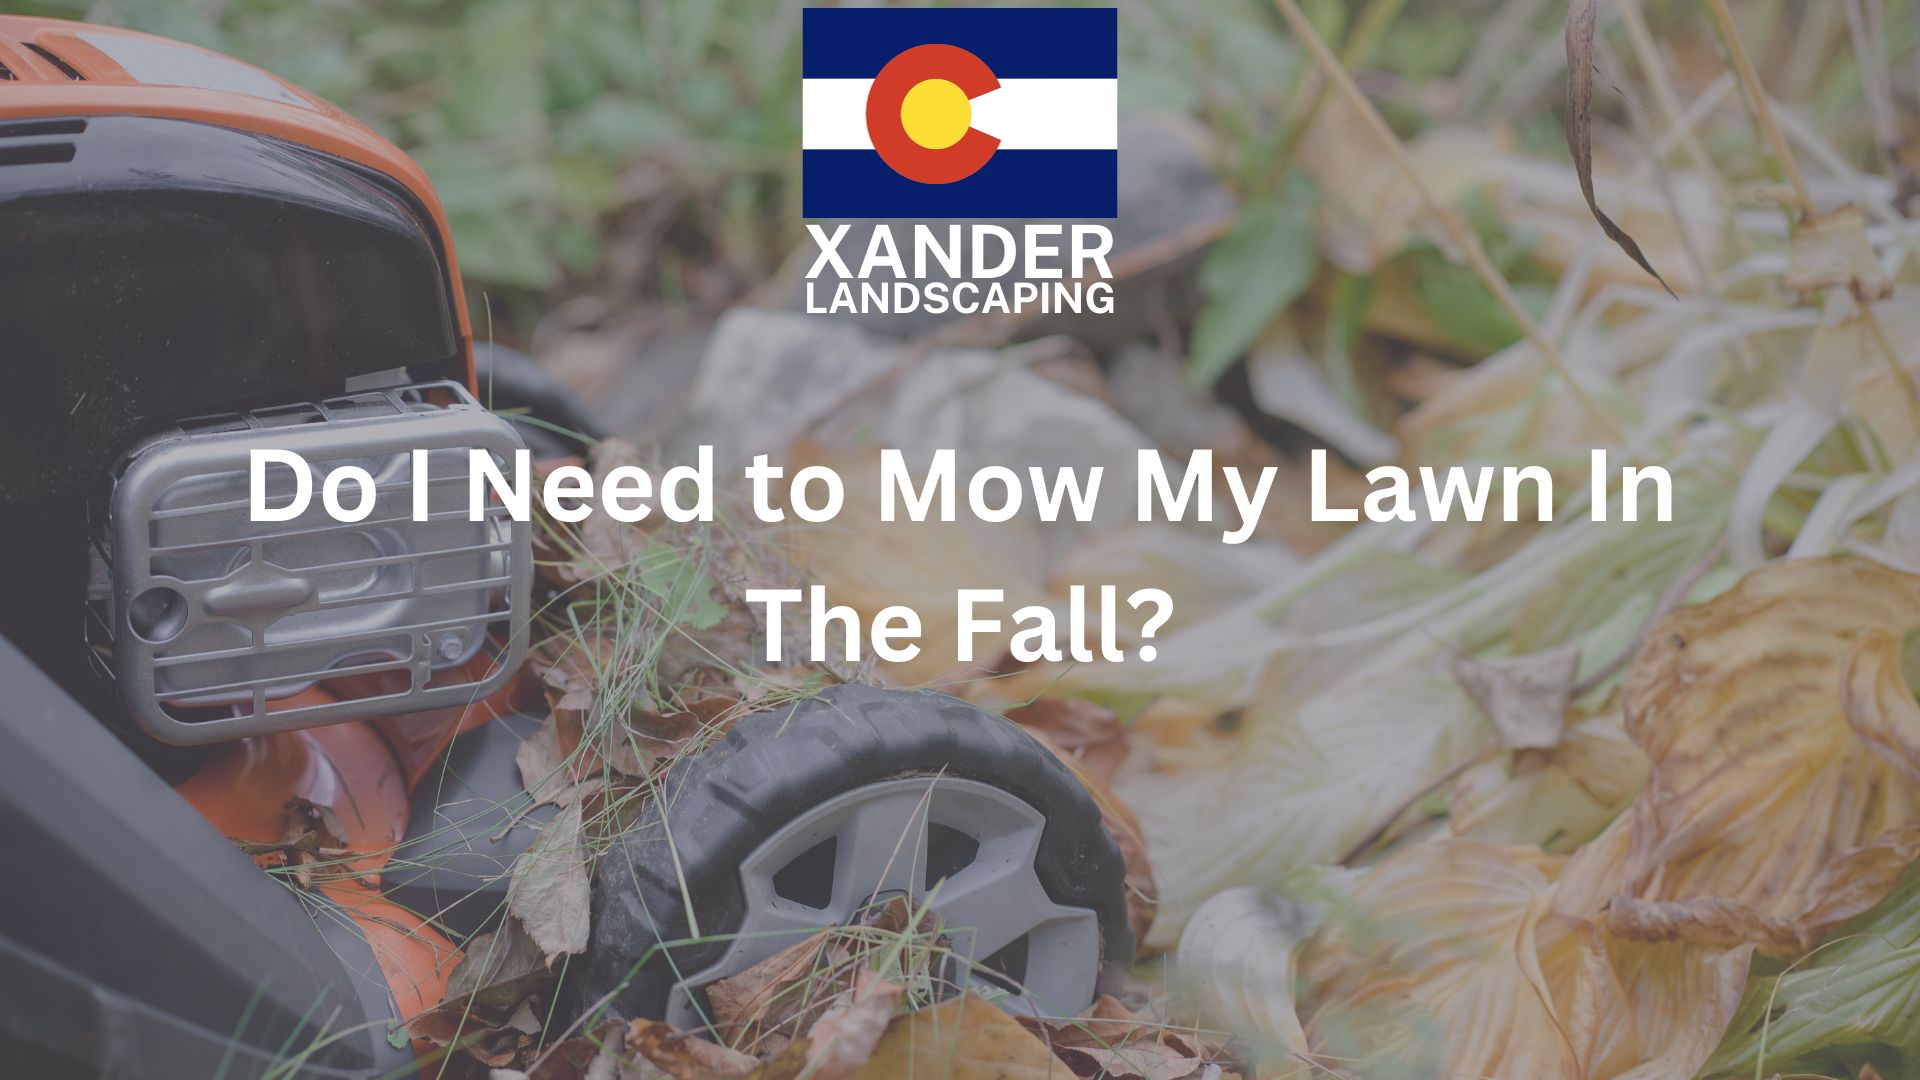 Xander Landscaping - Do I Need to Mow My Lawn in the Fall? Denver Parker Landscaping services landscape company